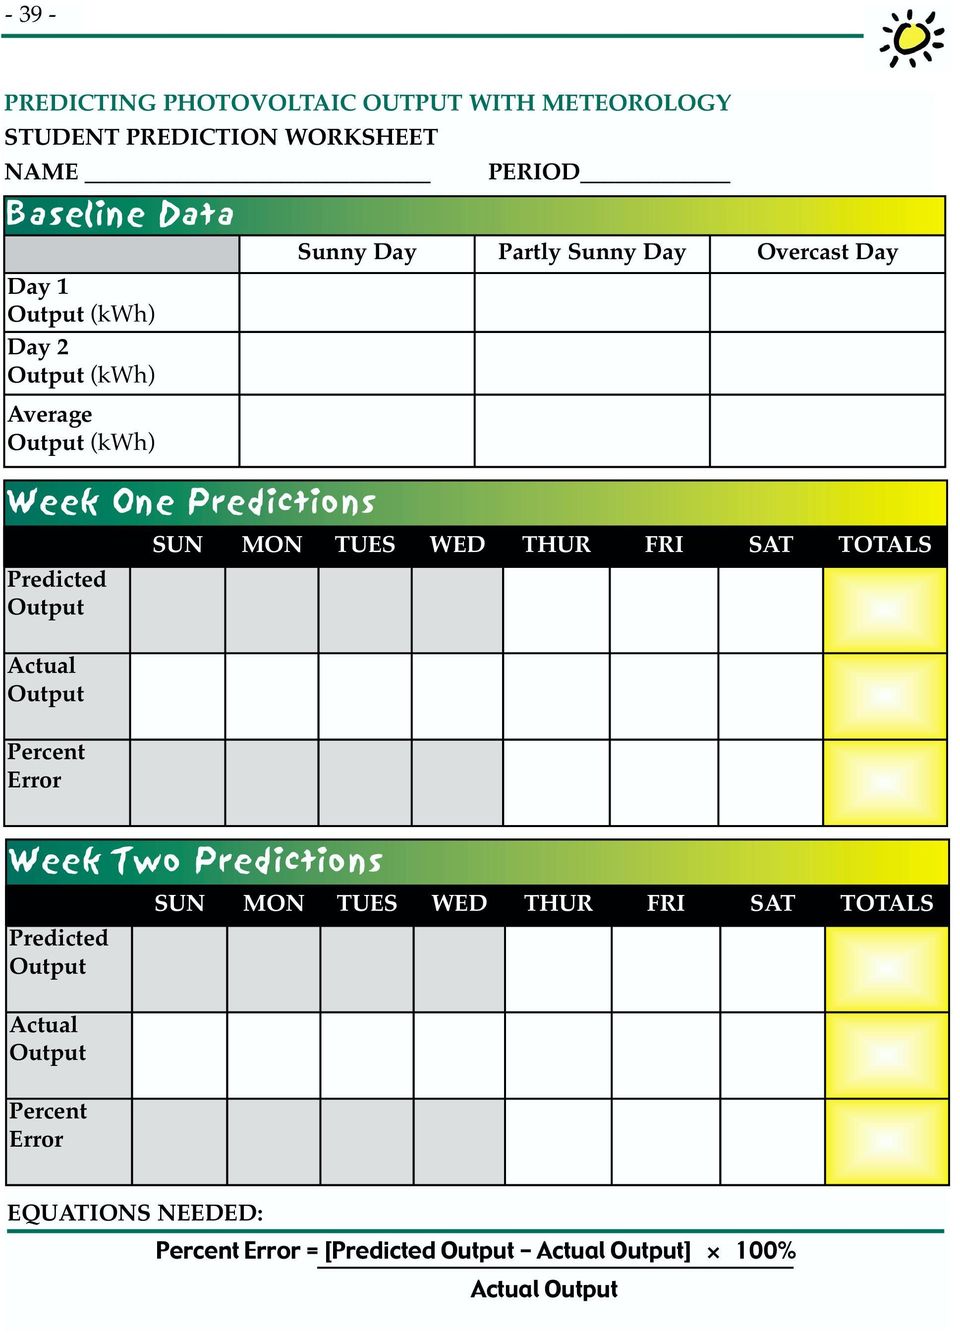 Partly Sunny Day Overcast Day SUN MON TUES WED THUR FRI SAT TOTALS Week Two Predictions Predicted Output Actual Output